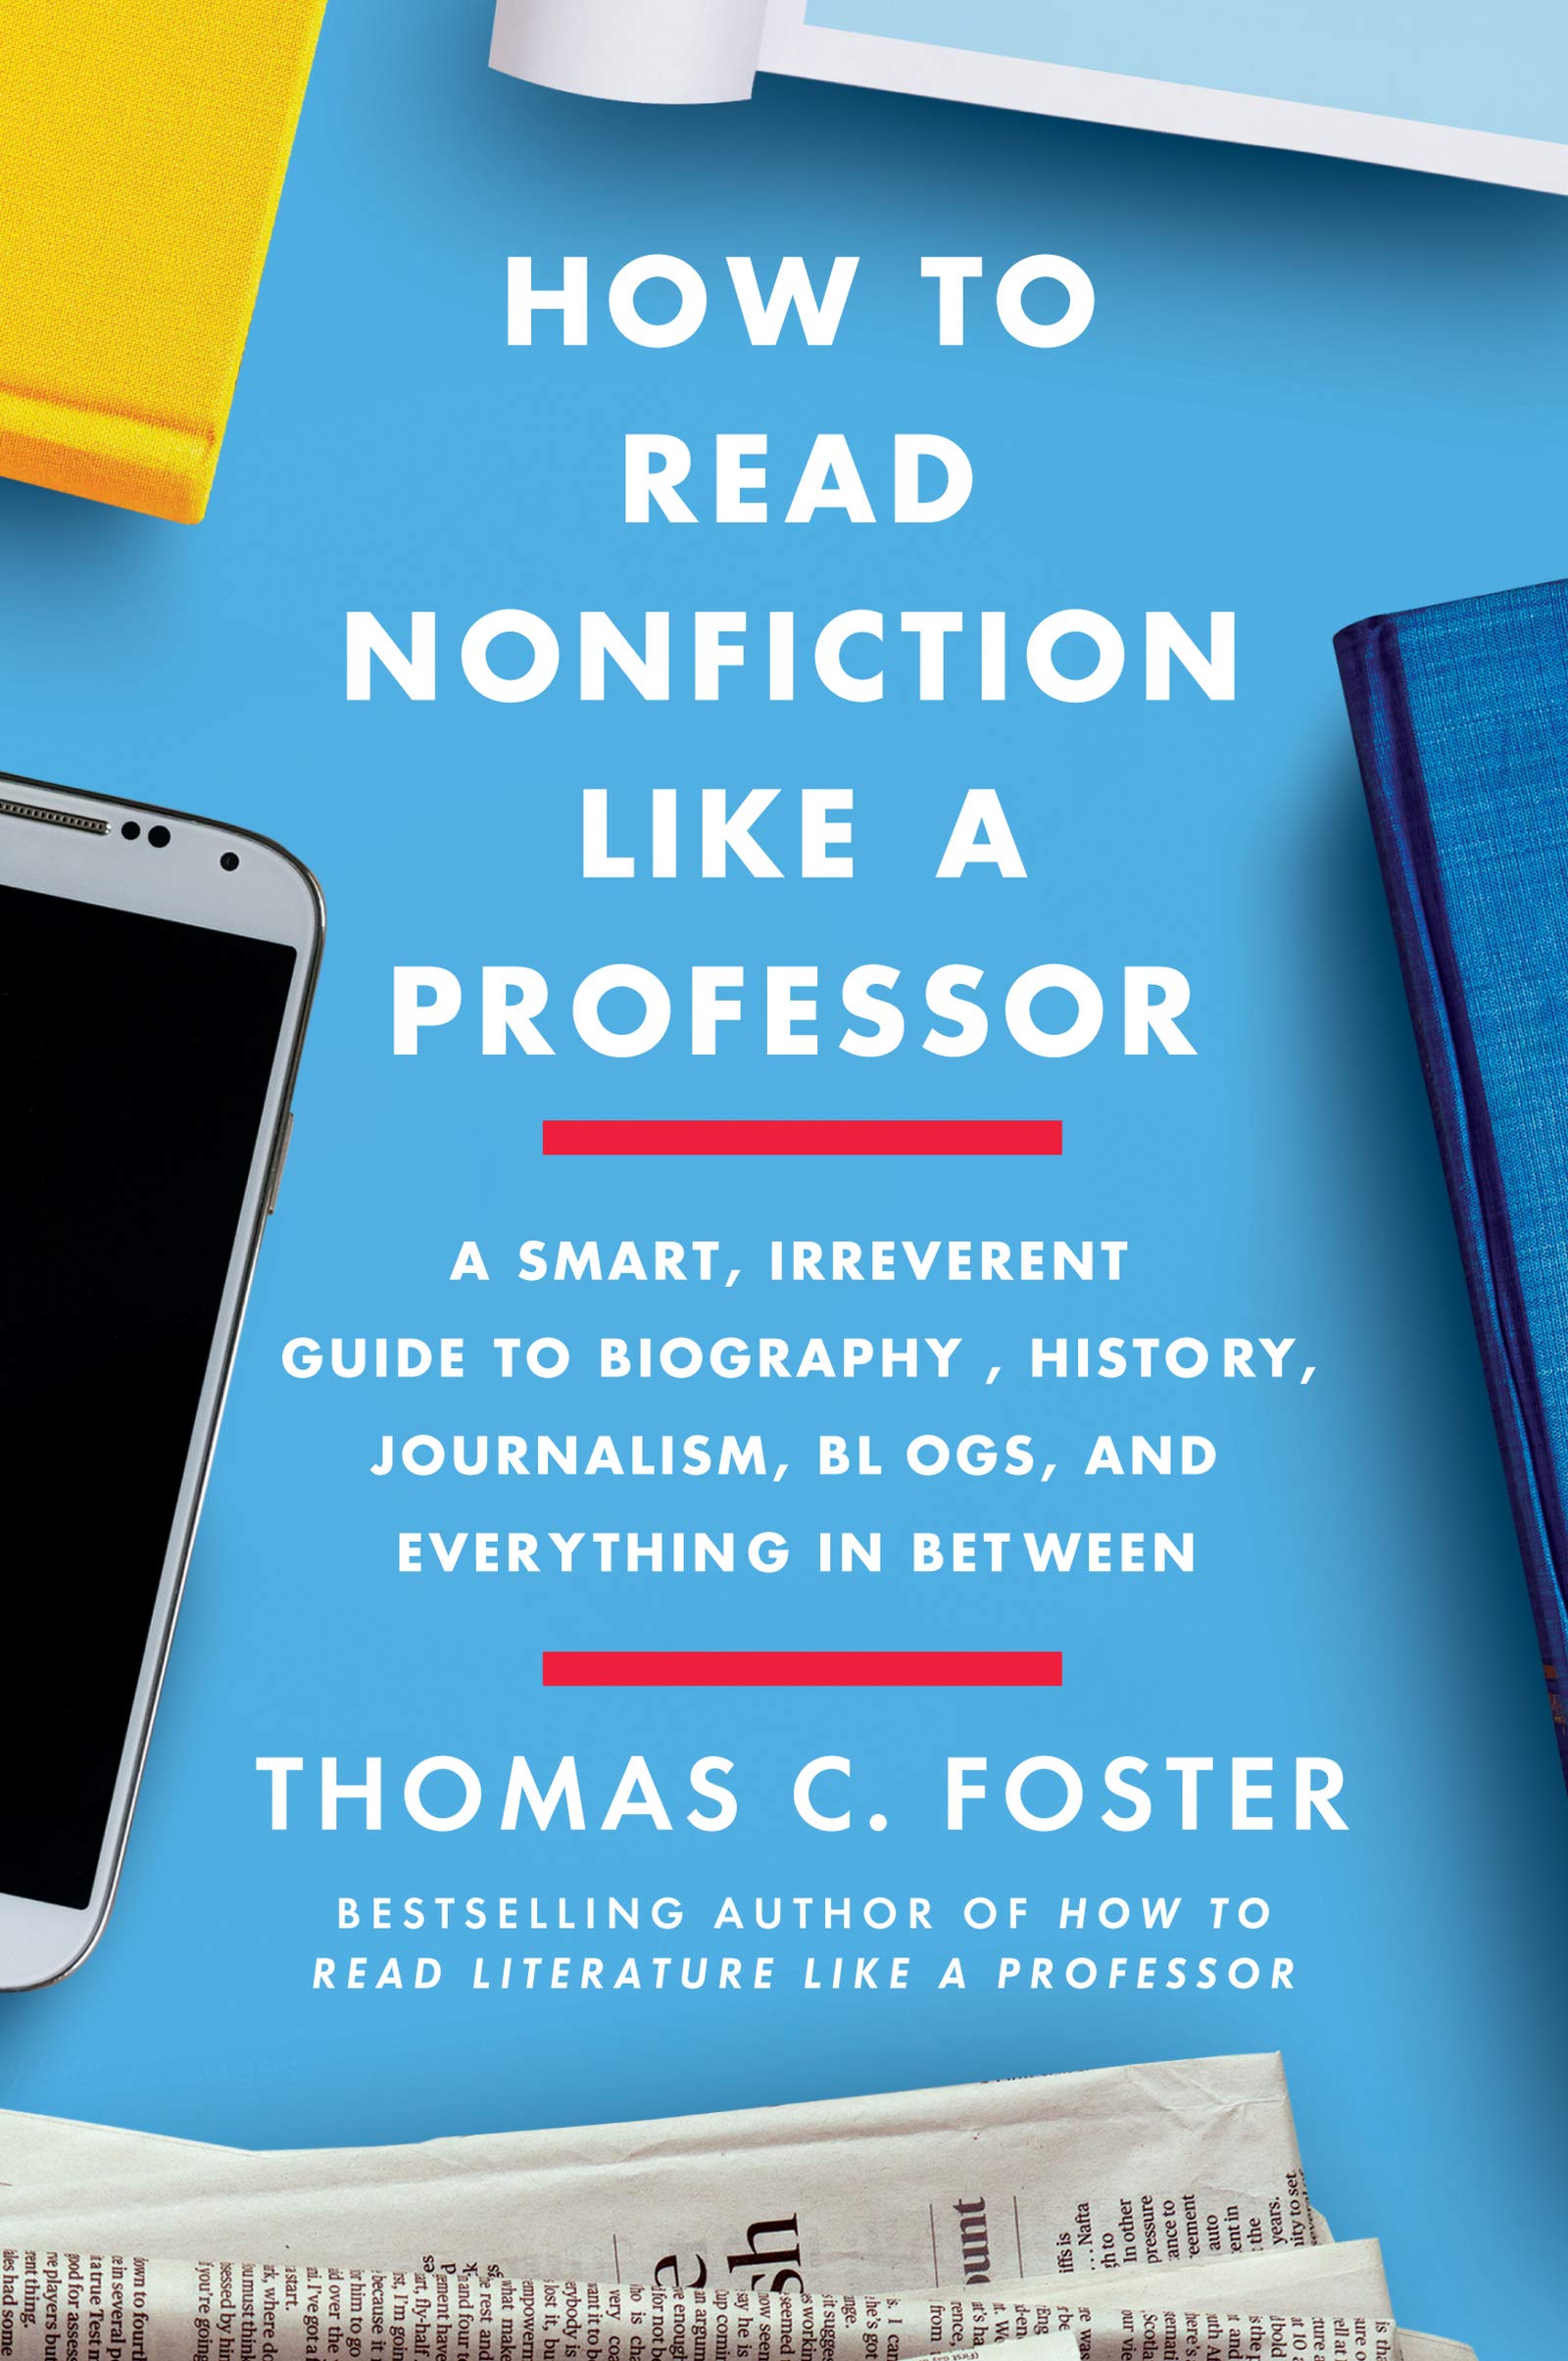 How To Read Nonfiction Like A Professor | Thomas C. Foster